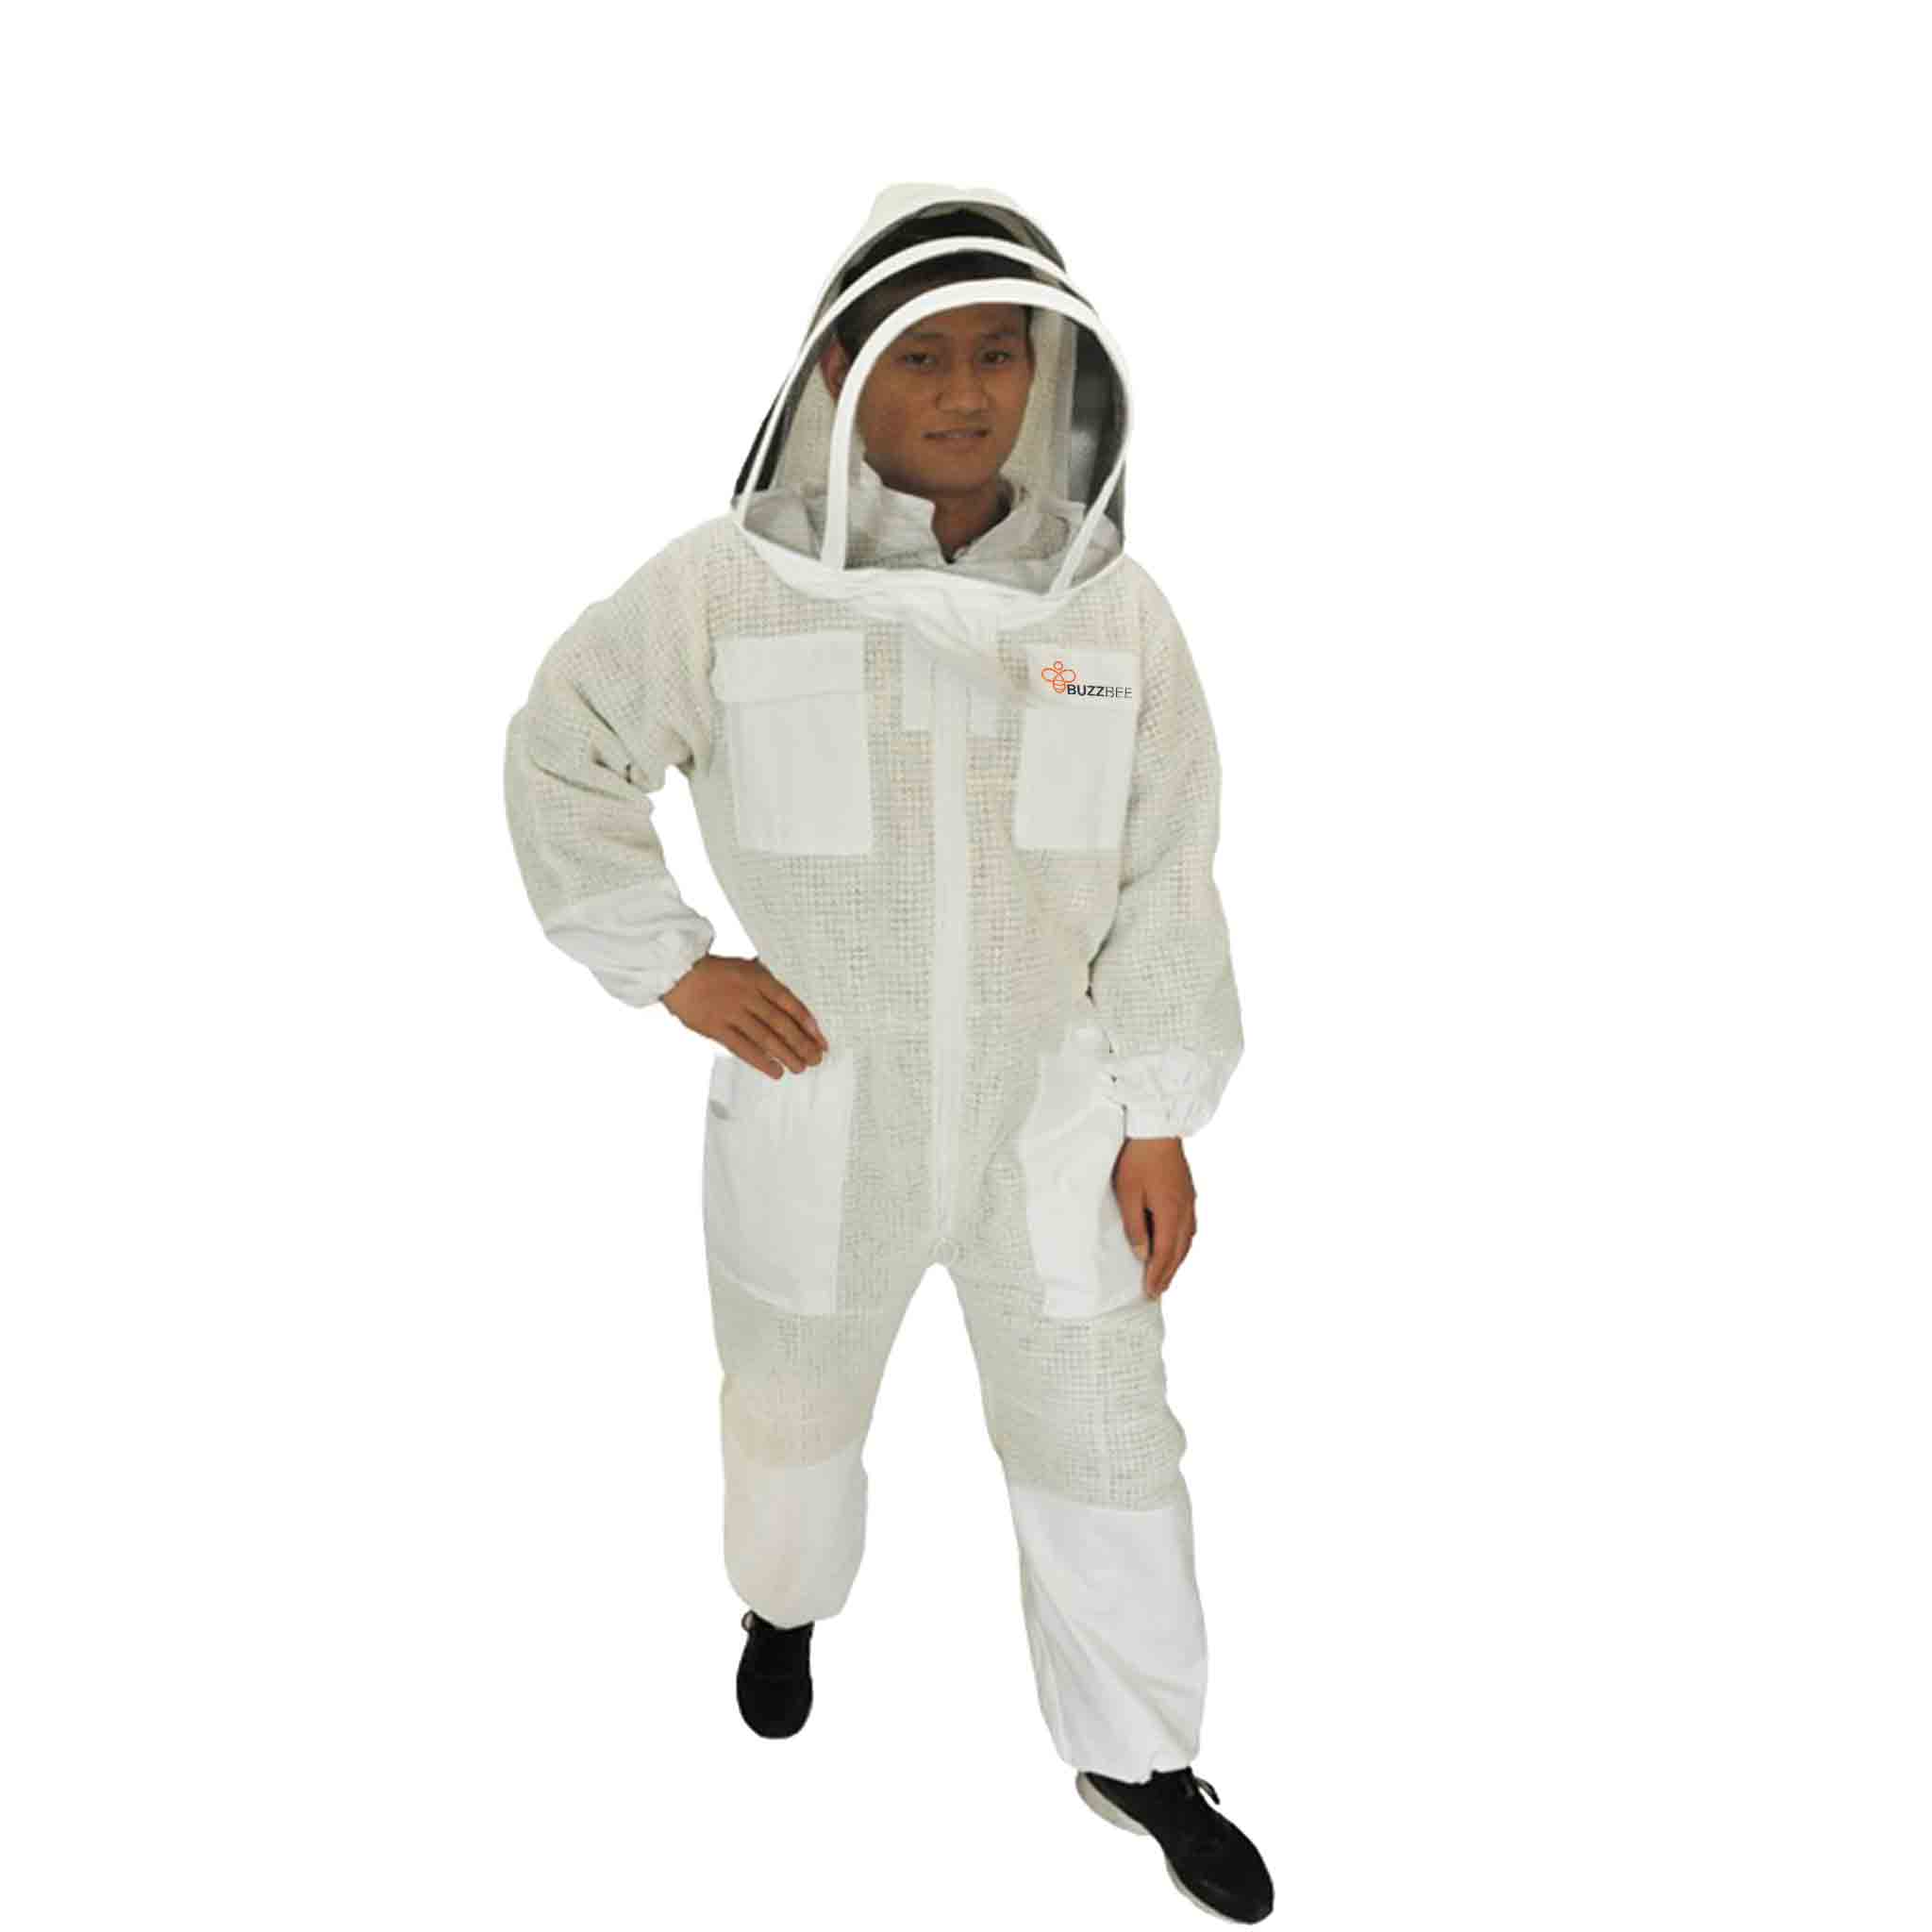 Beekeeping Ventilated Suit and Zipped Accordion Beekeeping Hood - Clothing collection by Buzzbee Beekeeping Supplies